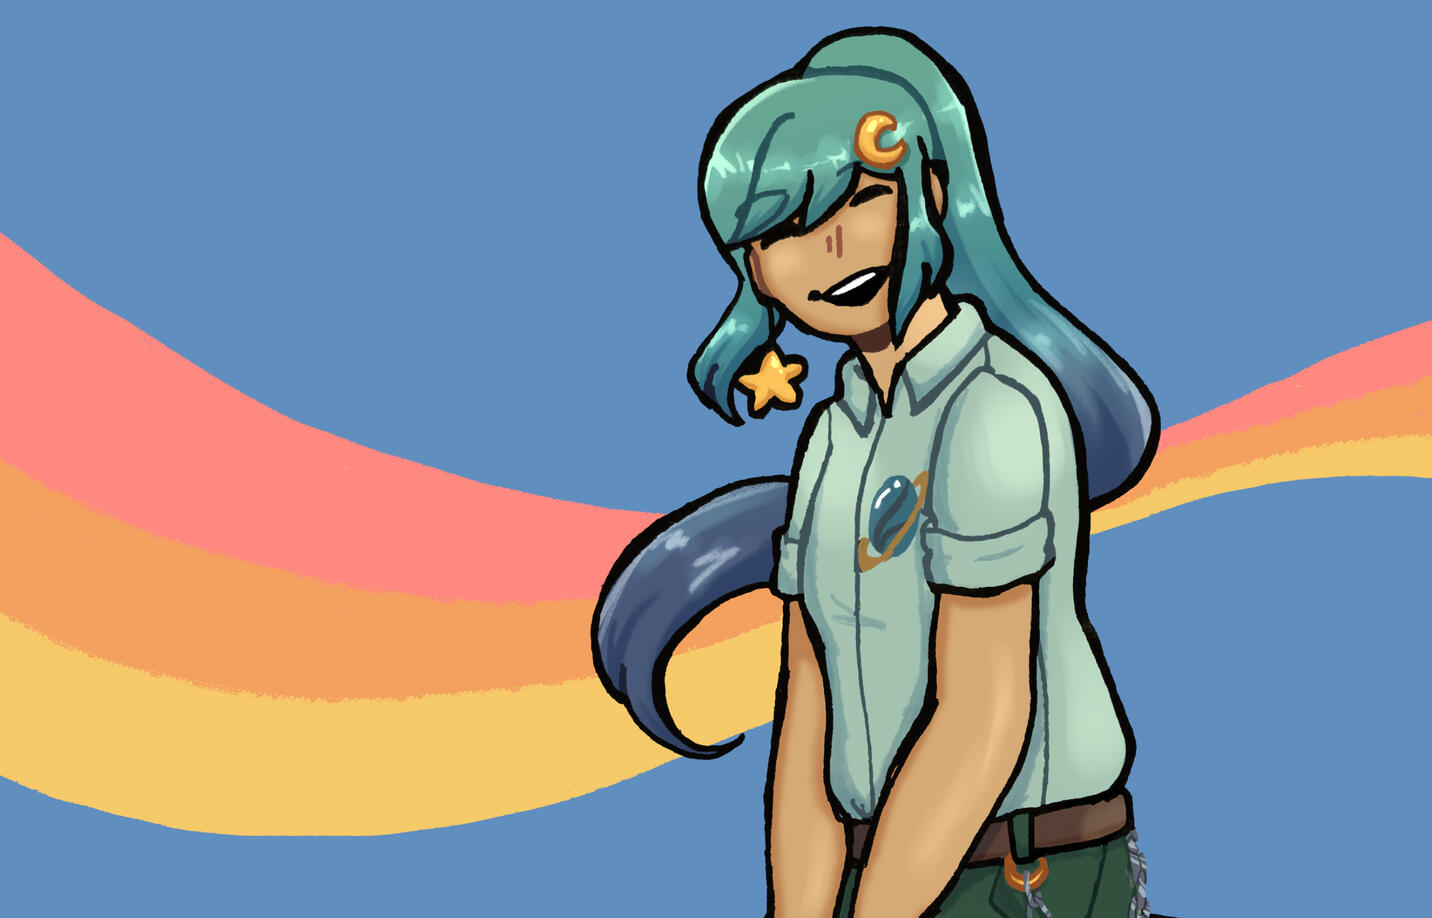 Girl with teal-blue hair smiling, she has a star earring and a moon hairclip and is wearing a mint button up with a planet patch.